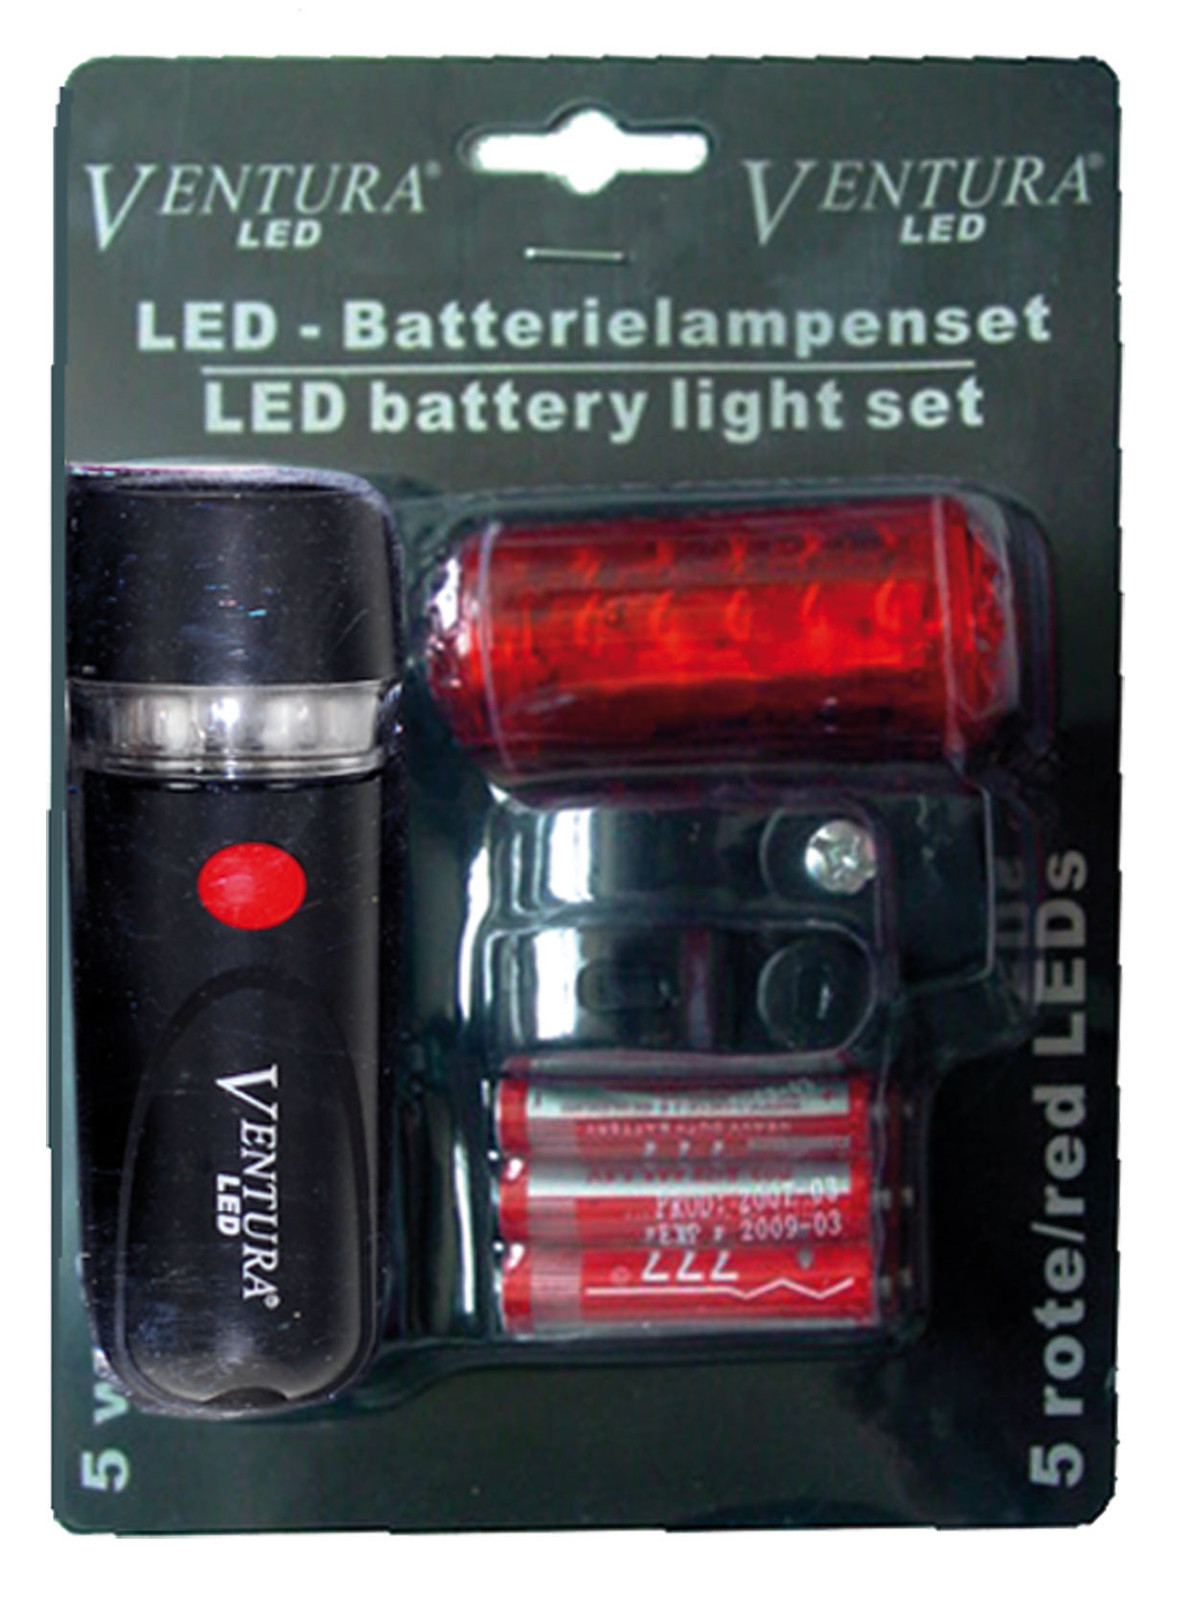  M-Wave Headlight 5 Led And Taillight 5 Led   M-Wave Headlight 5 Led And Taillight 5 Led 